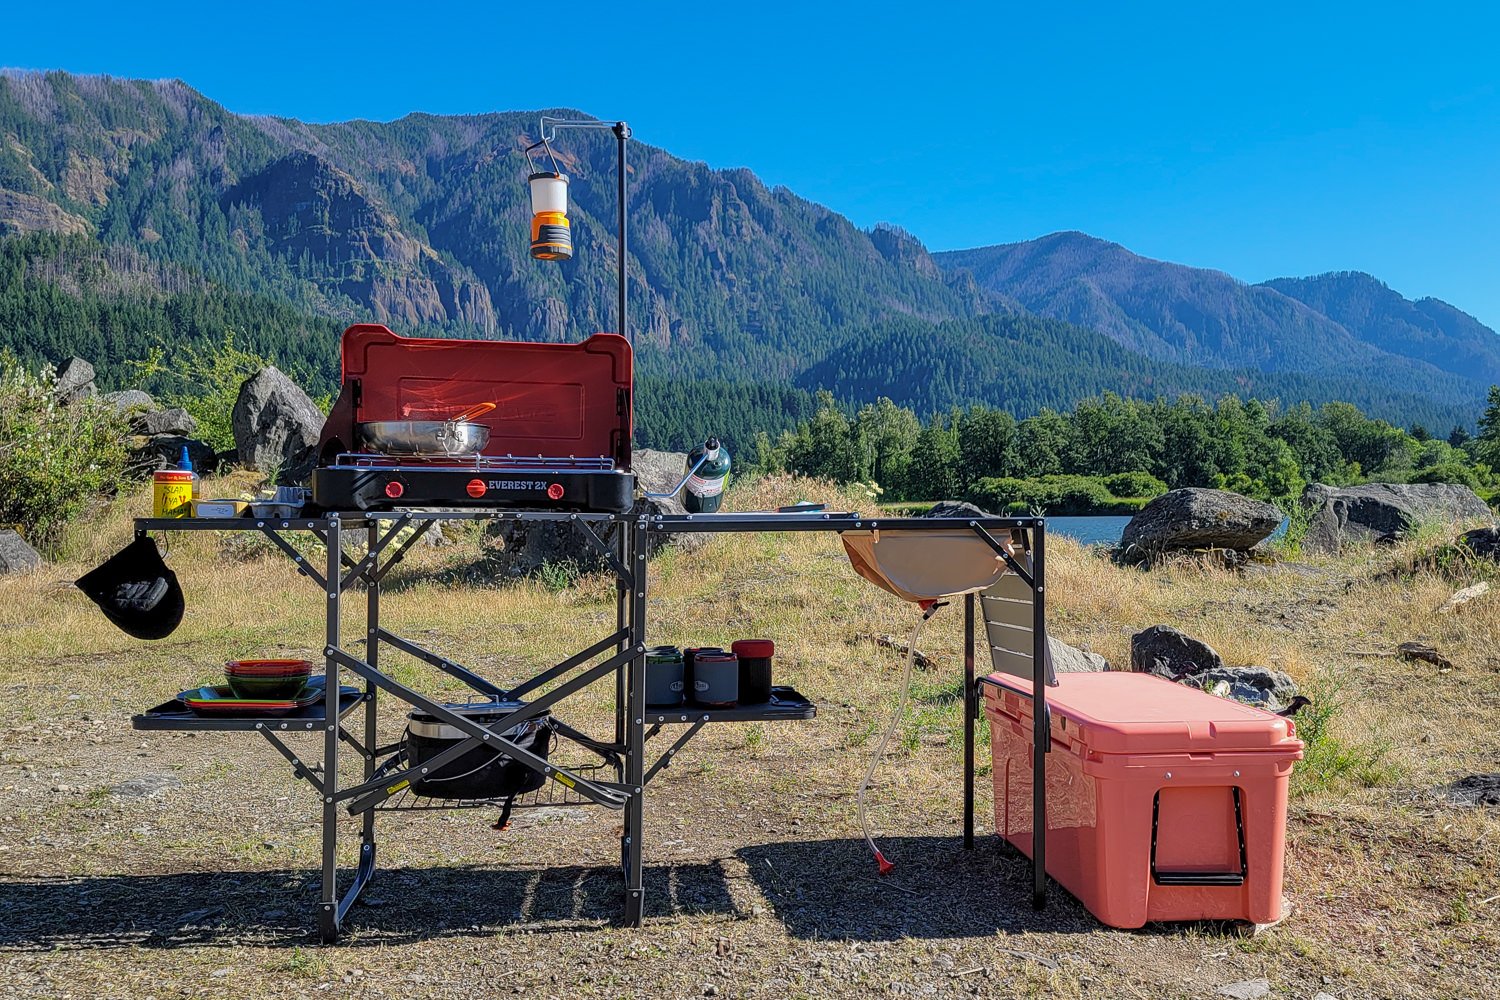 The GCI Master Cook Station all set up for camp cooking in the Columbia River Gorge